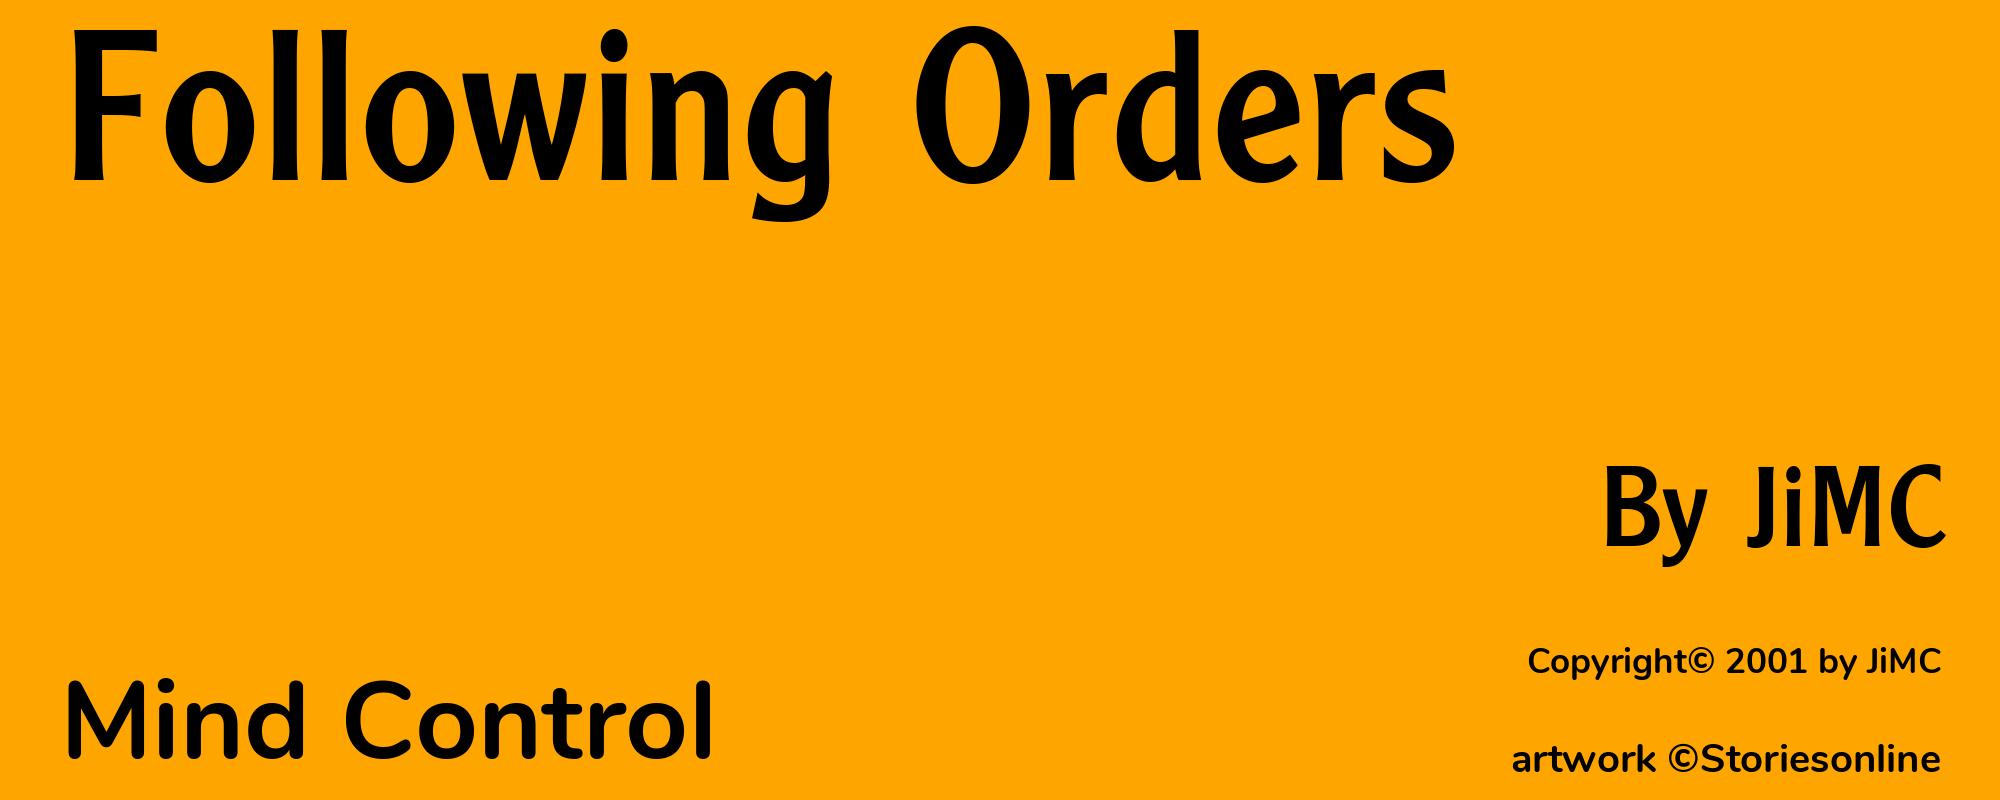 Following Orders - Cover